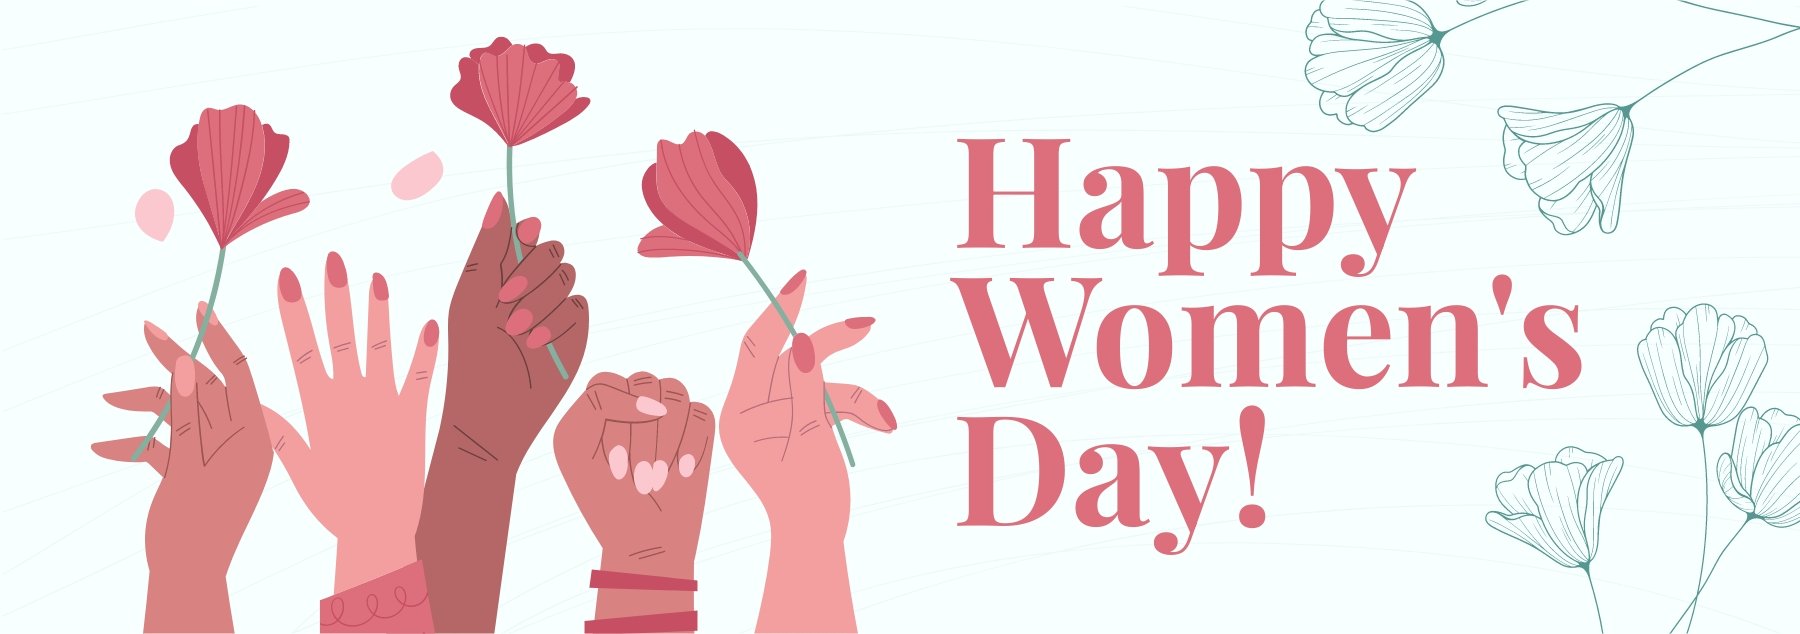 Women's Day Tumblr Banner Template